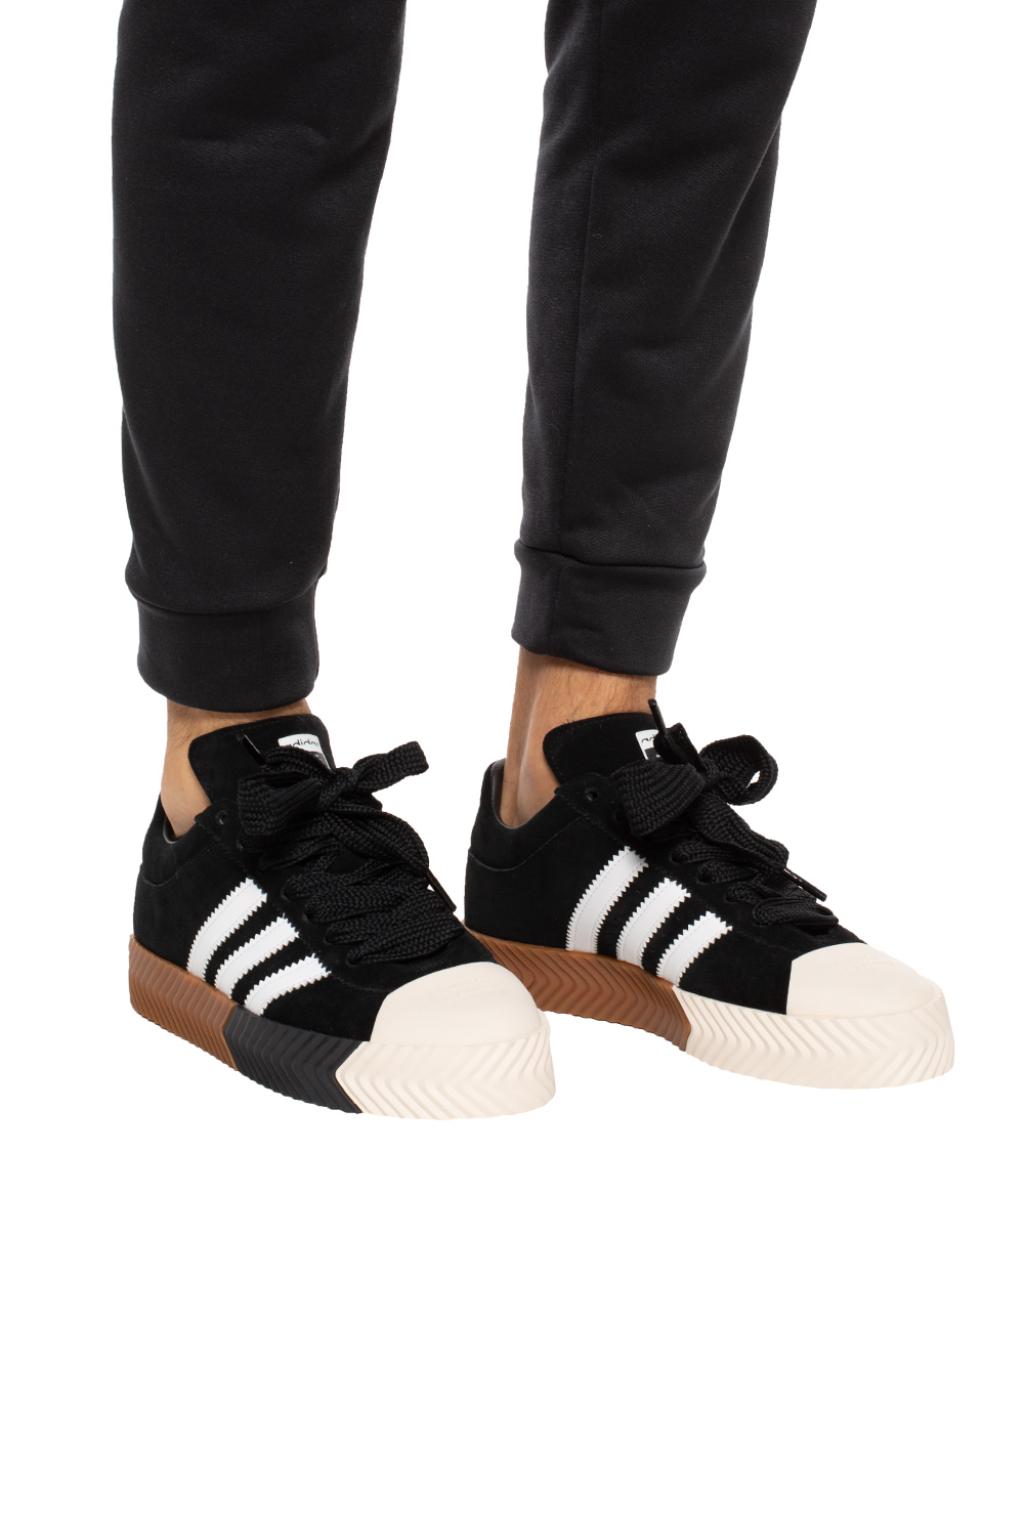 Skate Super' sneakers ADIDAS by 